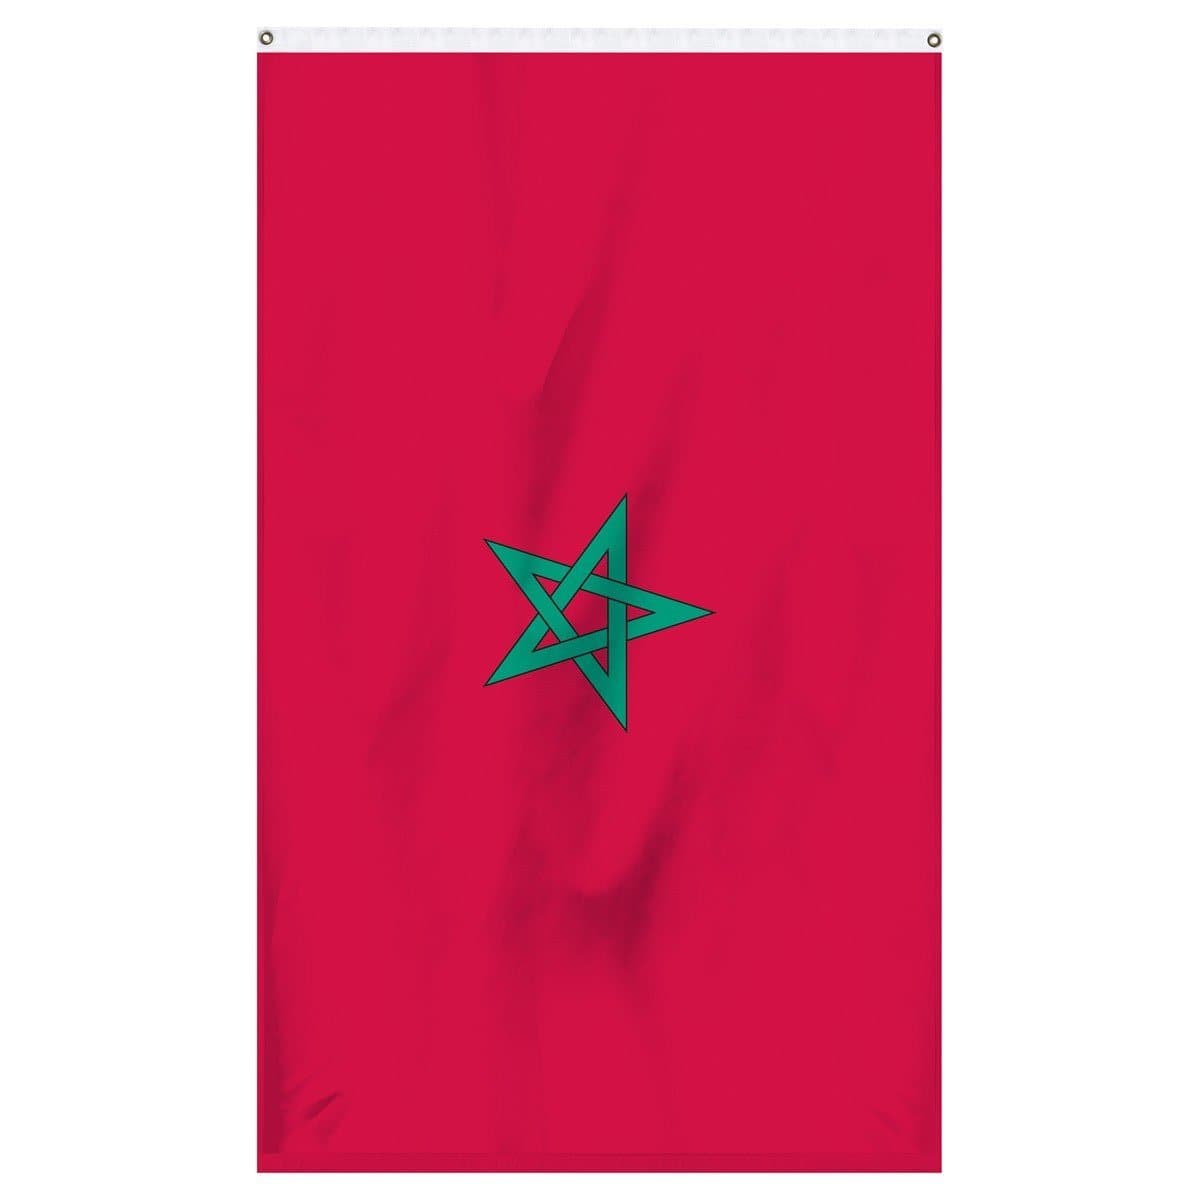 Morocco national flag for sale to buy online from Atlantic Flagpole, an American company.